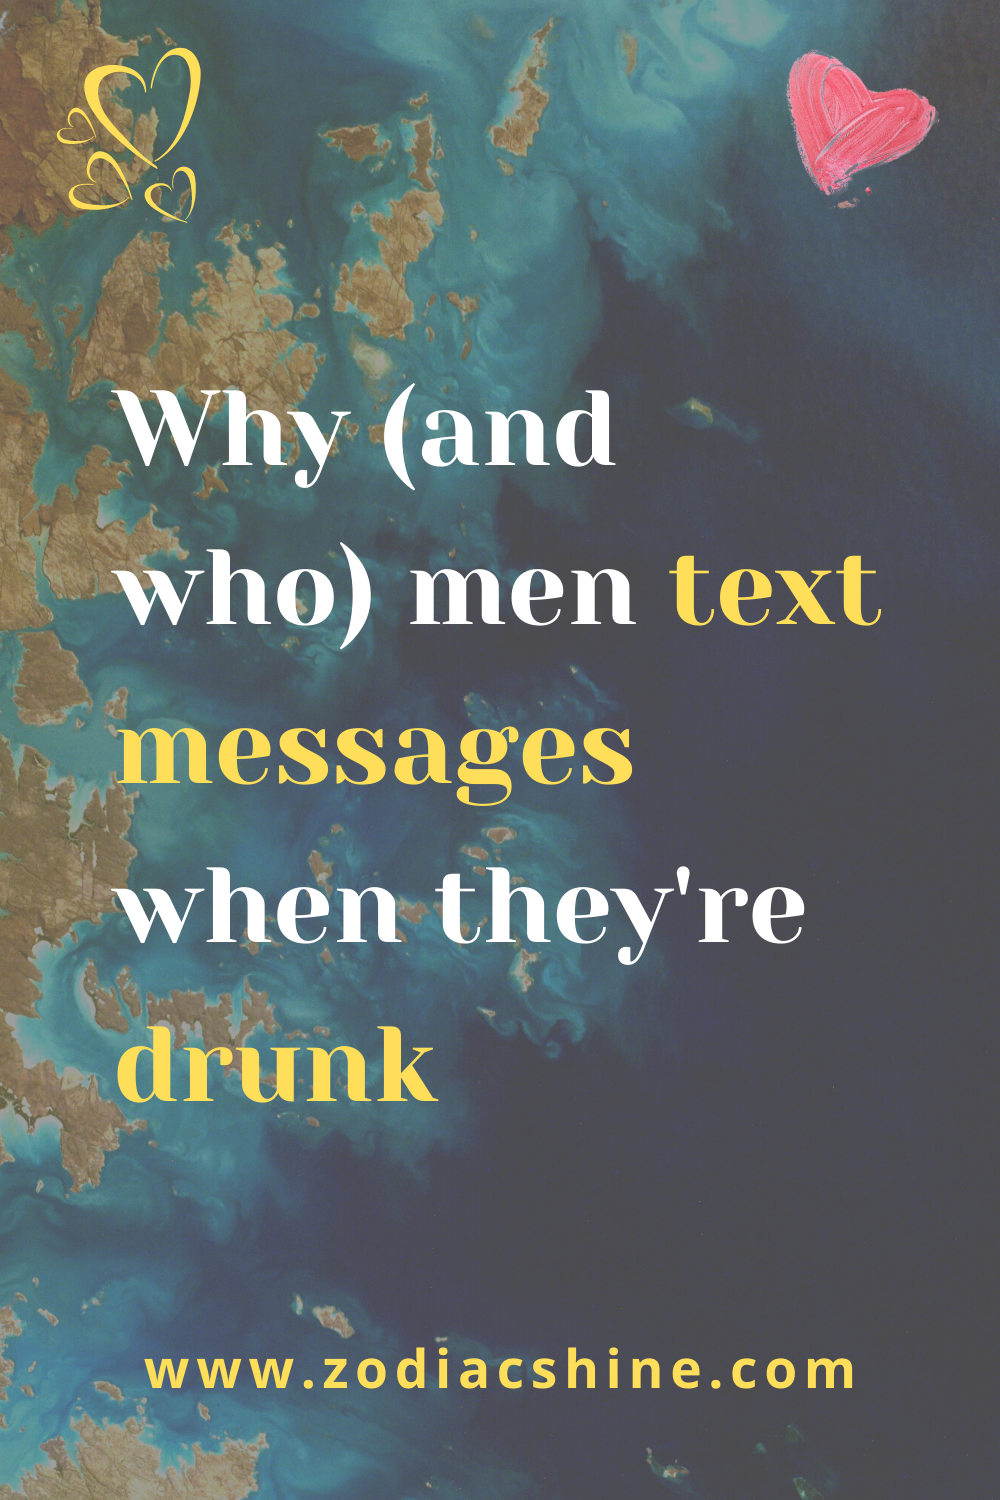 Why (and who) men text messages when they're drunk